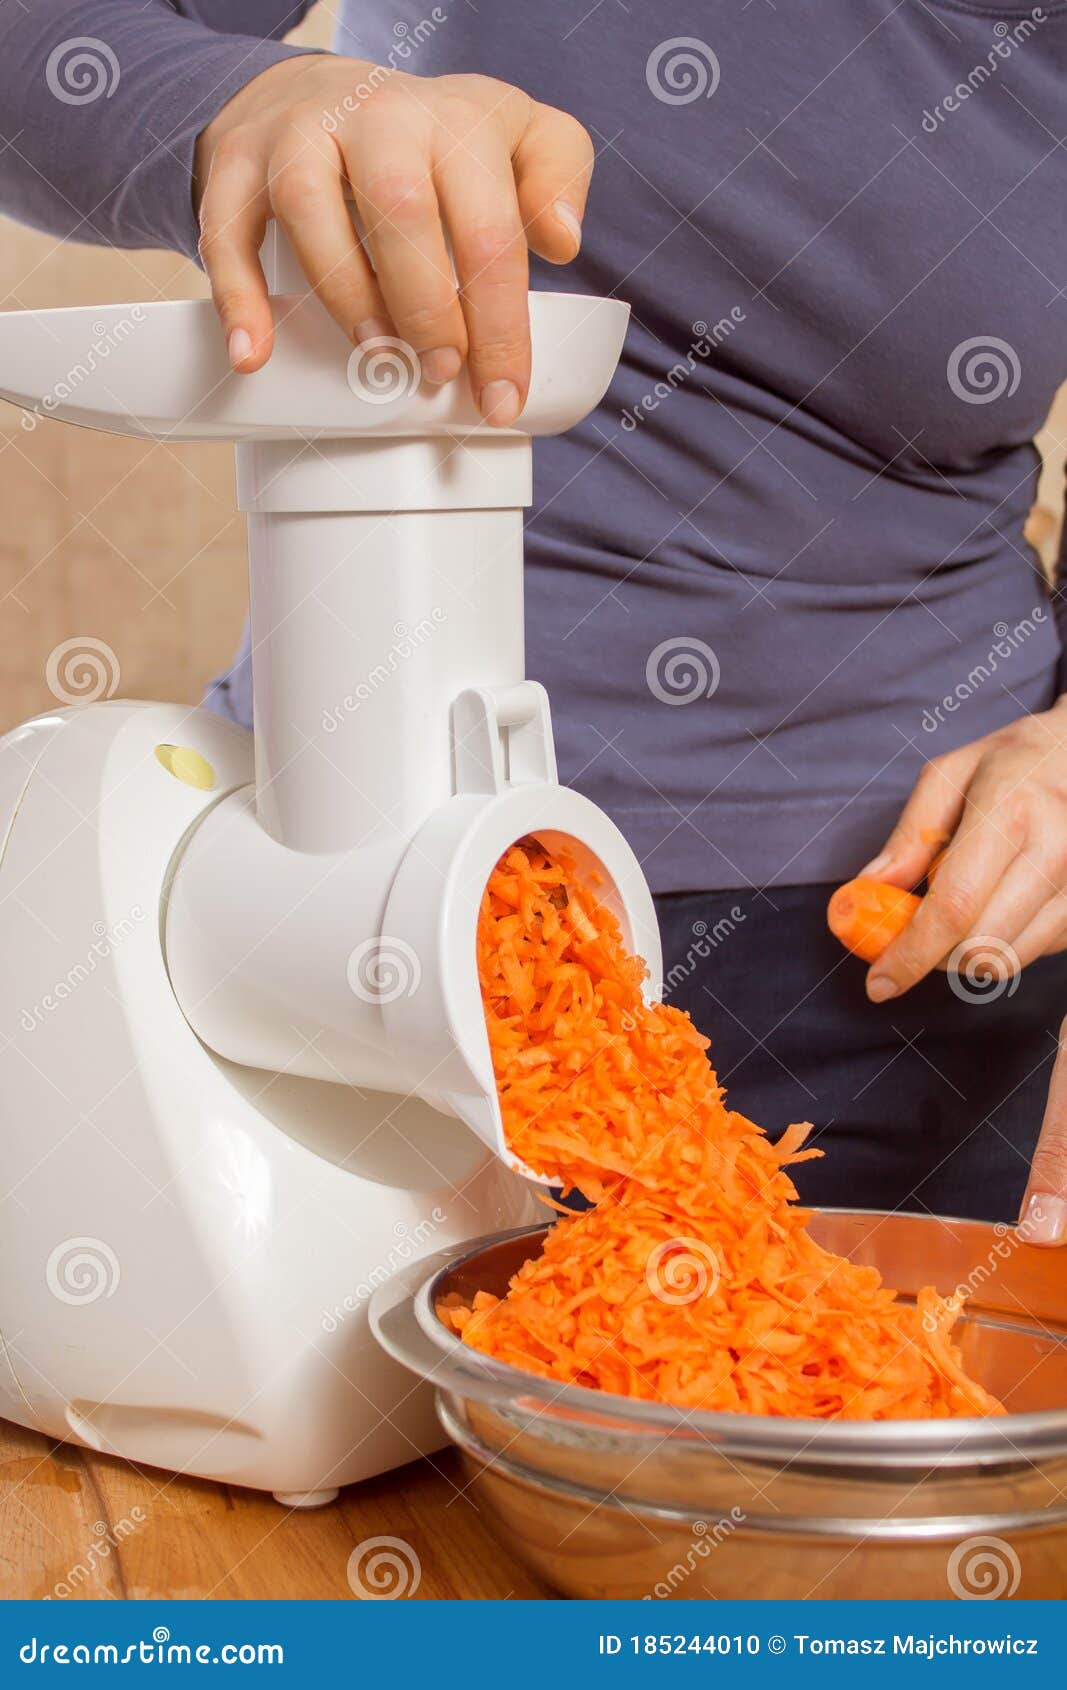 https://thumbs.dreamstime.com/z/woman-cuts-carrot-small-pieces-using-electric-chopper-razor-attachment-cutting-vegetables-kitchen-185244010.jpg